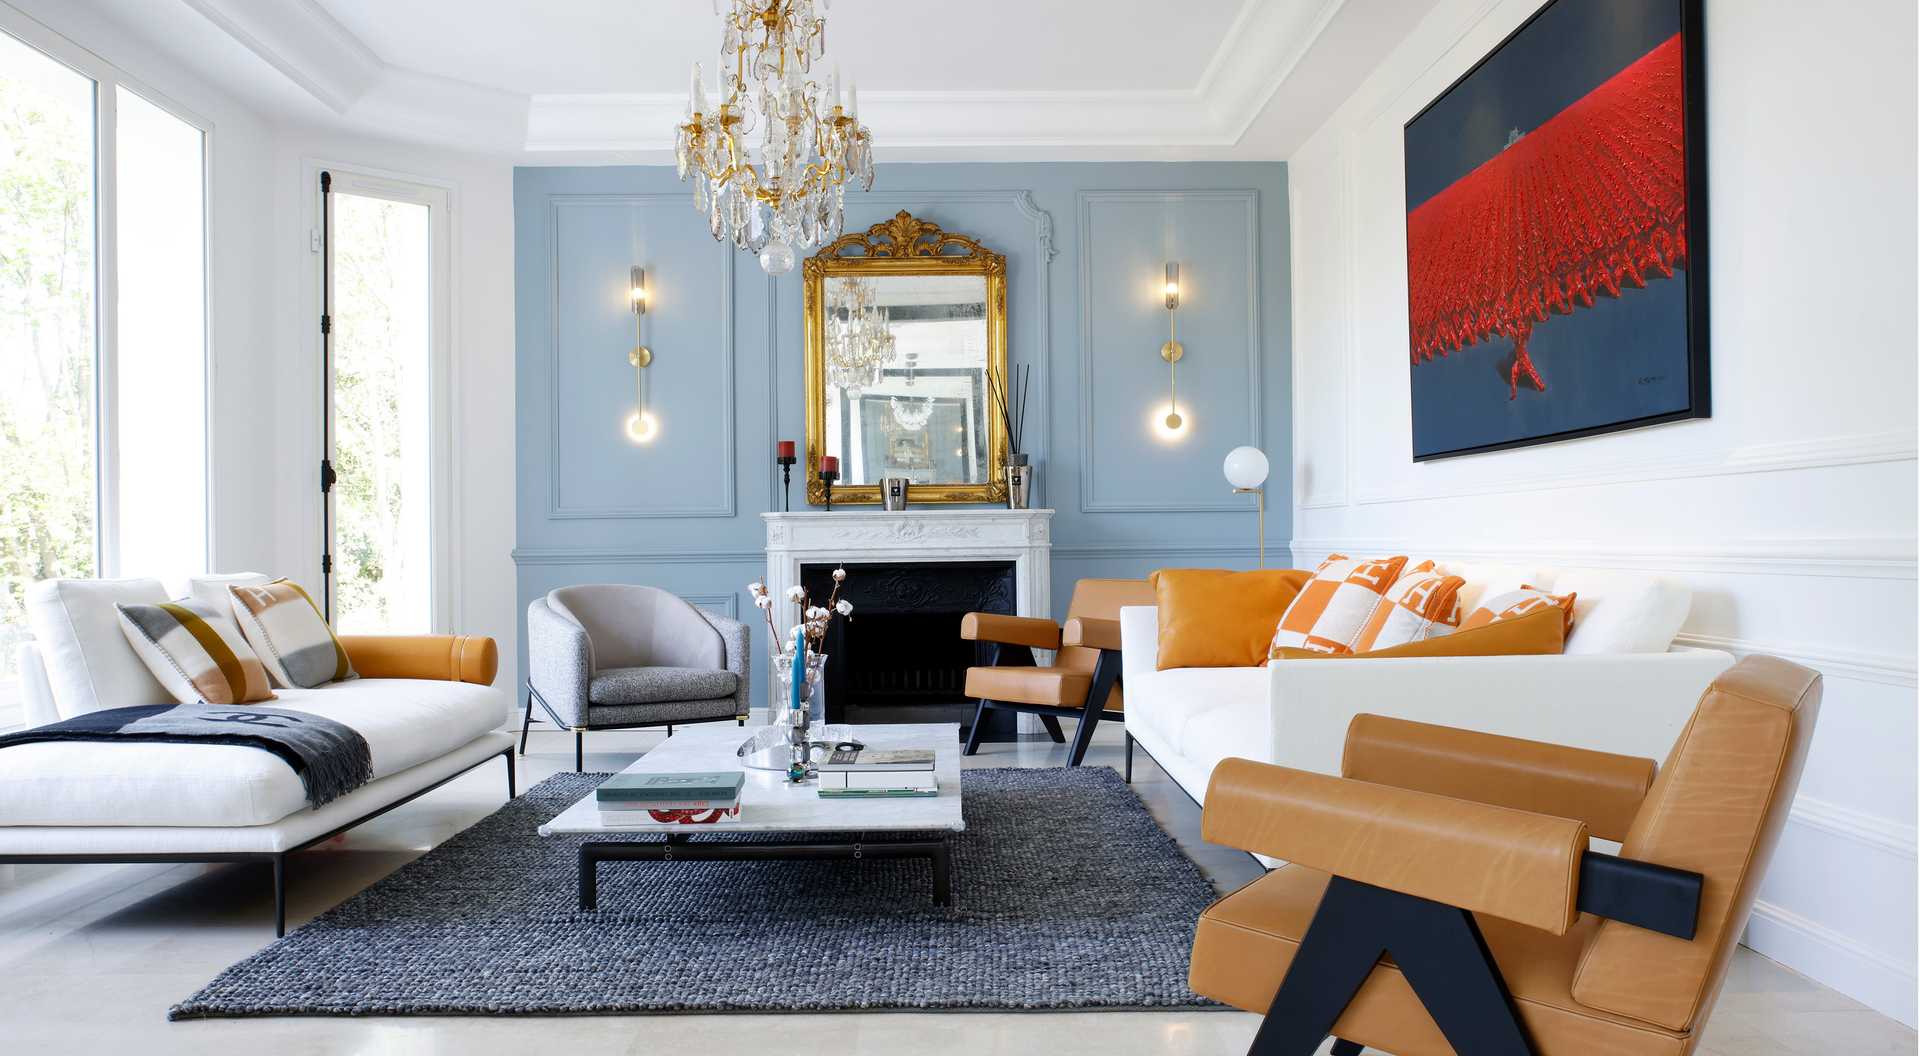 Interior makeover of an apartment by an interior designer in Paris